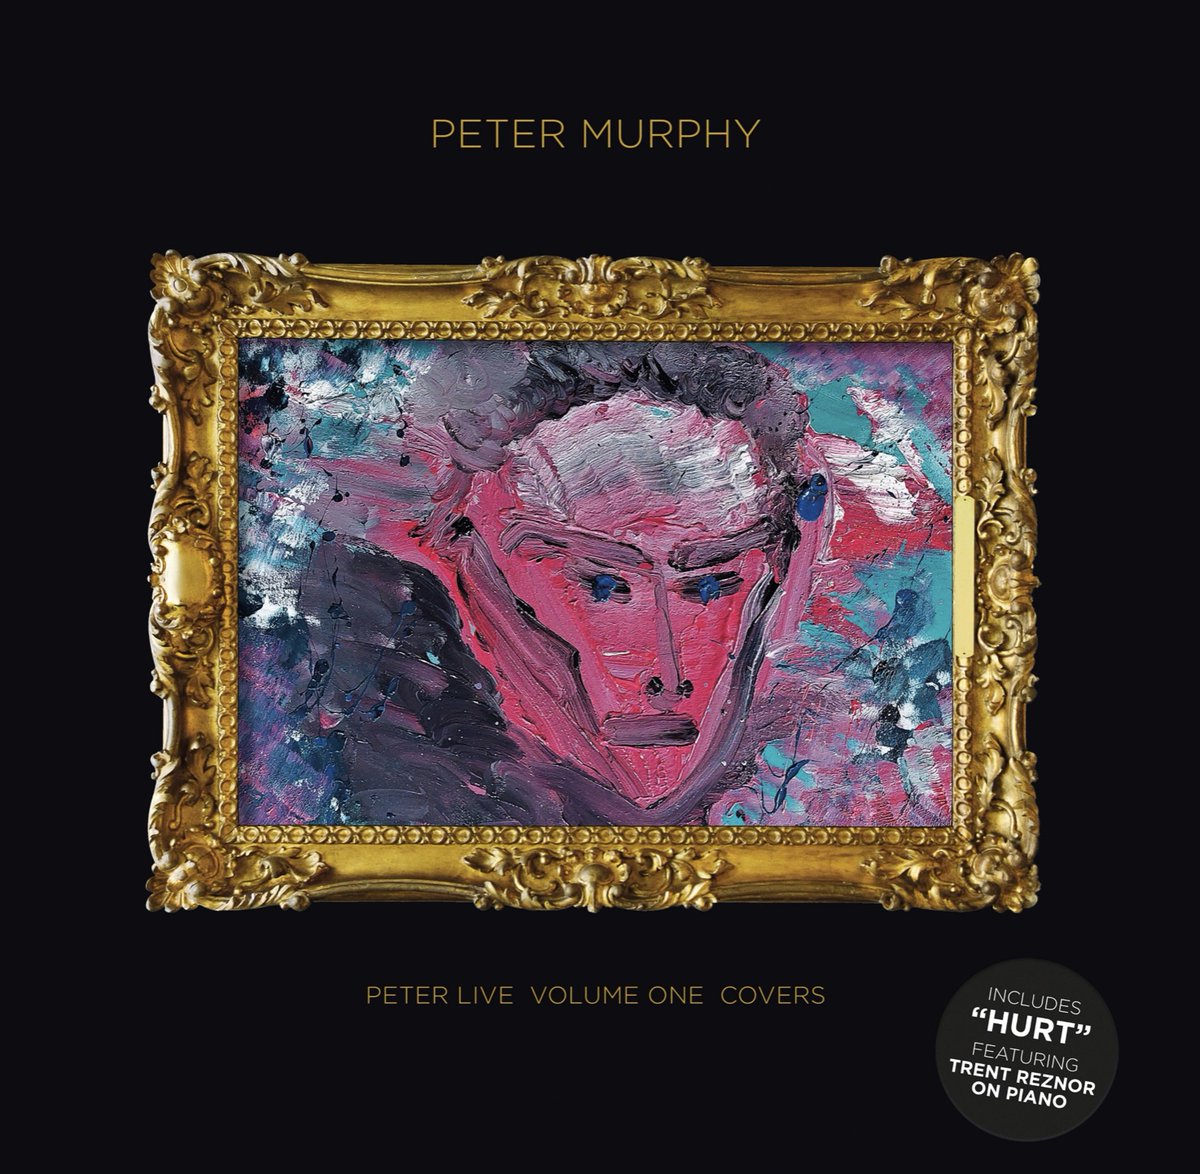 NEW LIVE VINYL RELEASES AVAILABLE NOW Full announcement/purchase links at instagram.com/petermurphyoff… “Peter Live Vol. 1-Covers”: cadizmerchstore.com/collections/pe… Only 30 extremely limited signed/numbered test pressings: cadizmerchstore.com/collections/pe…